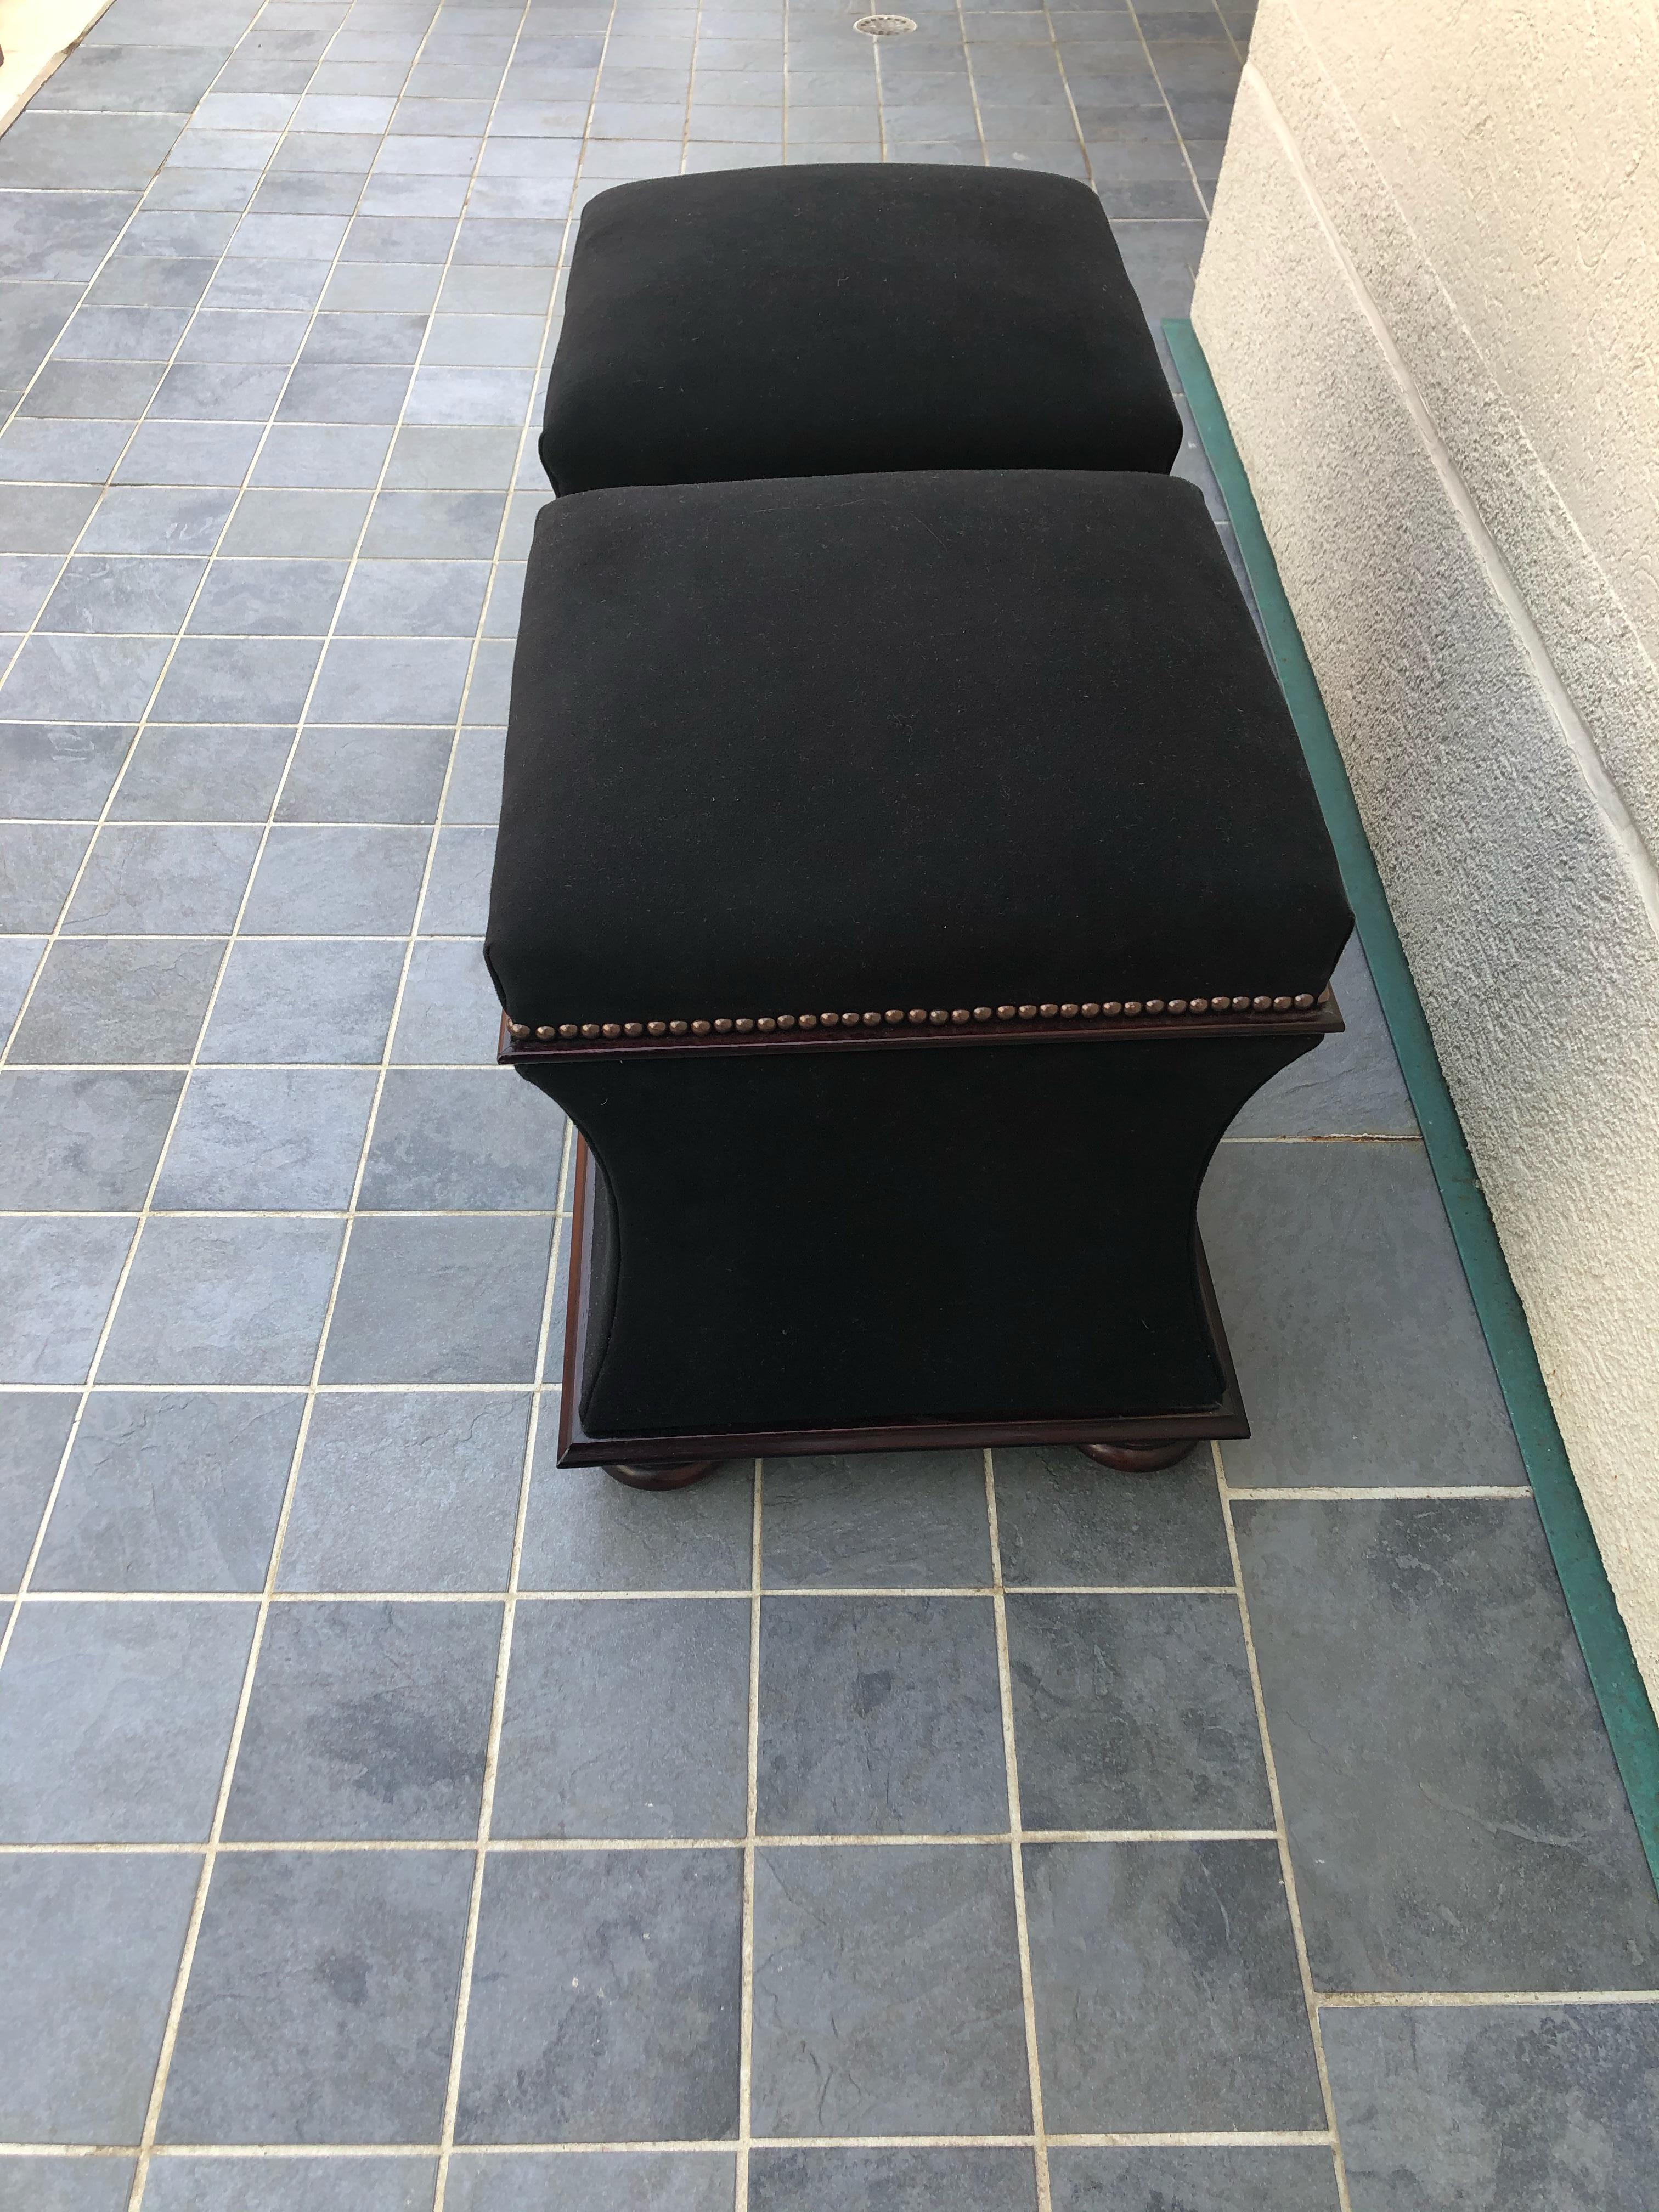 Fabulous pair of George smith storage ottomans foot stools. Striking black velvet mohair fabric with nail head trim and bun feet.  Both tops open to reveal handy storage inside.